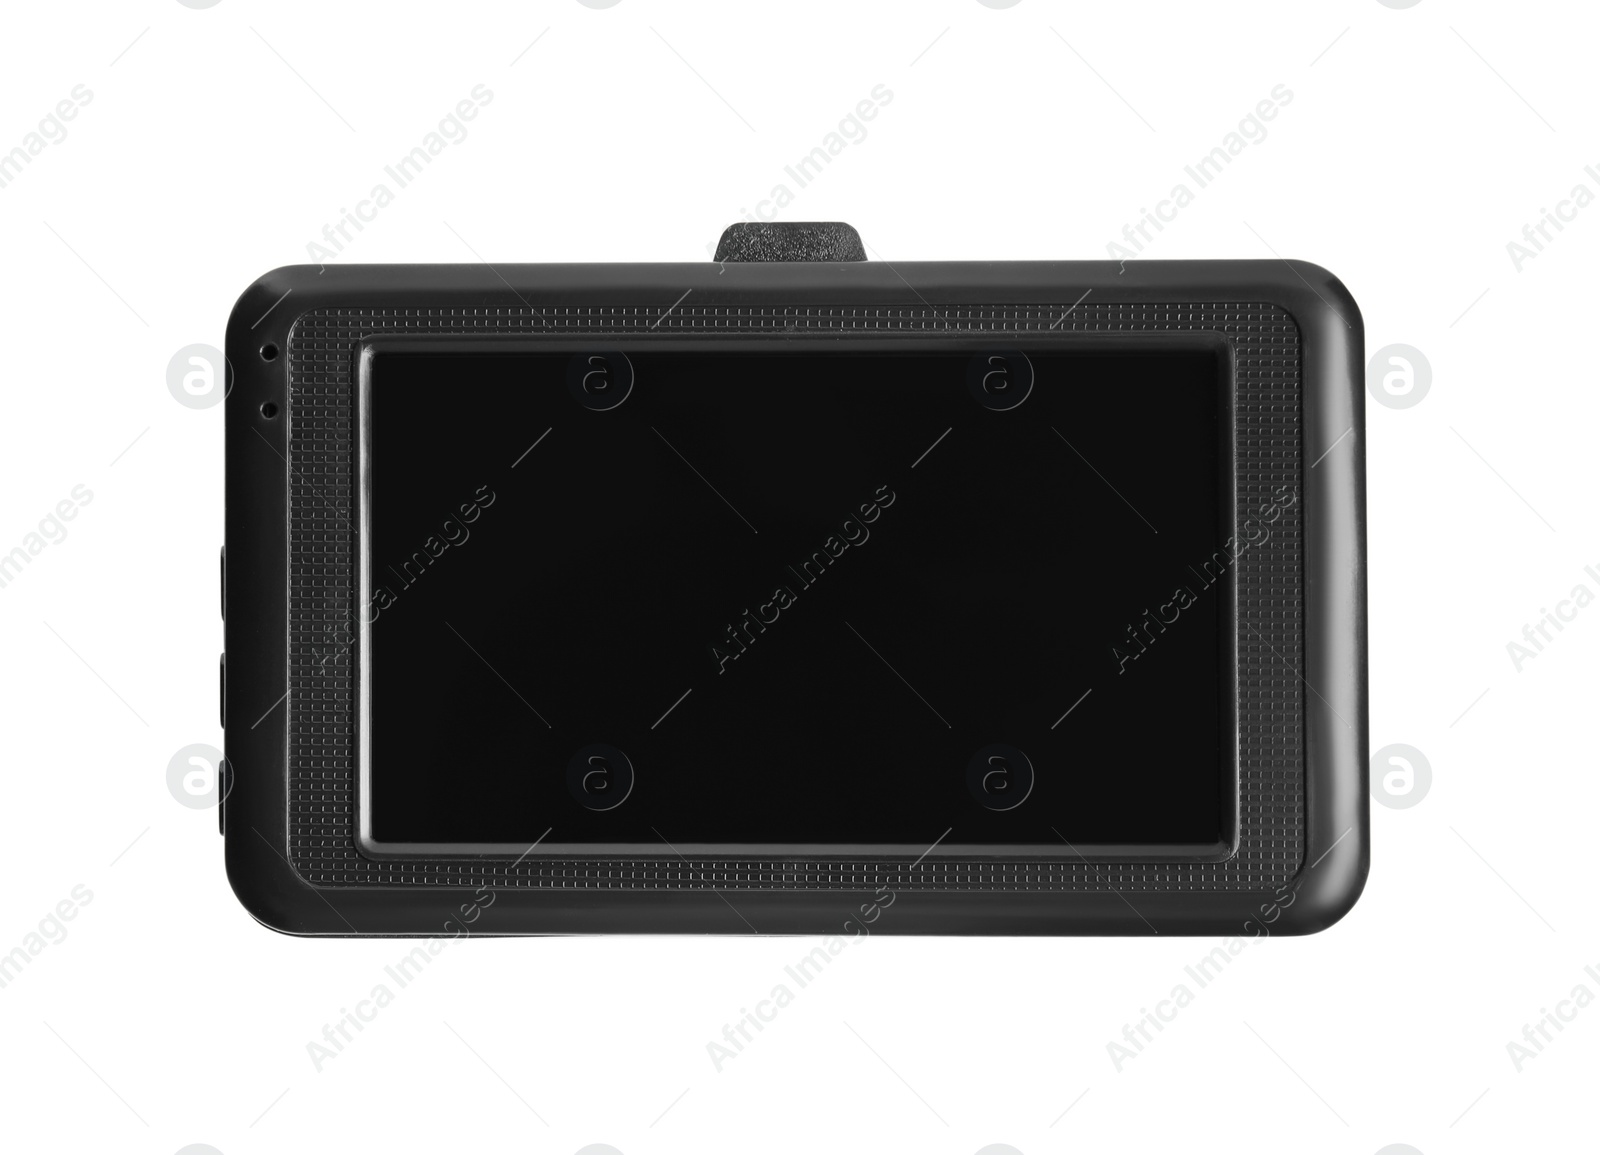 Photo of Modern car dashboard camera isolated on white